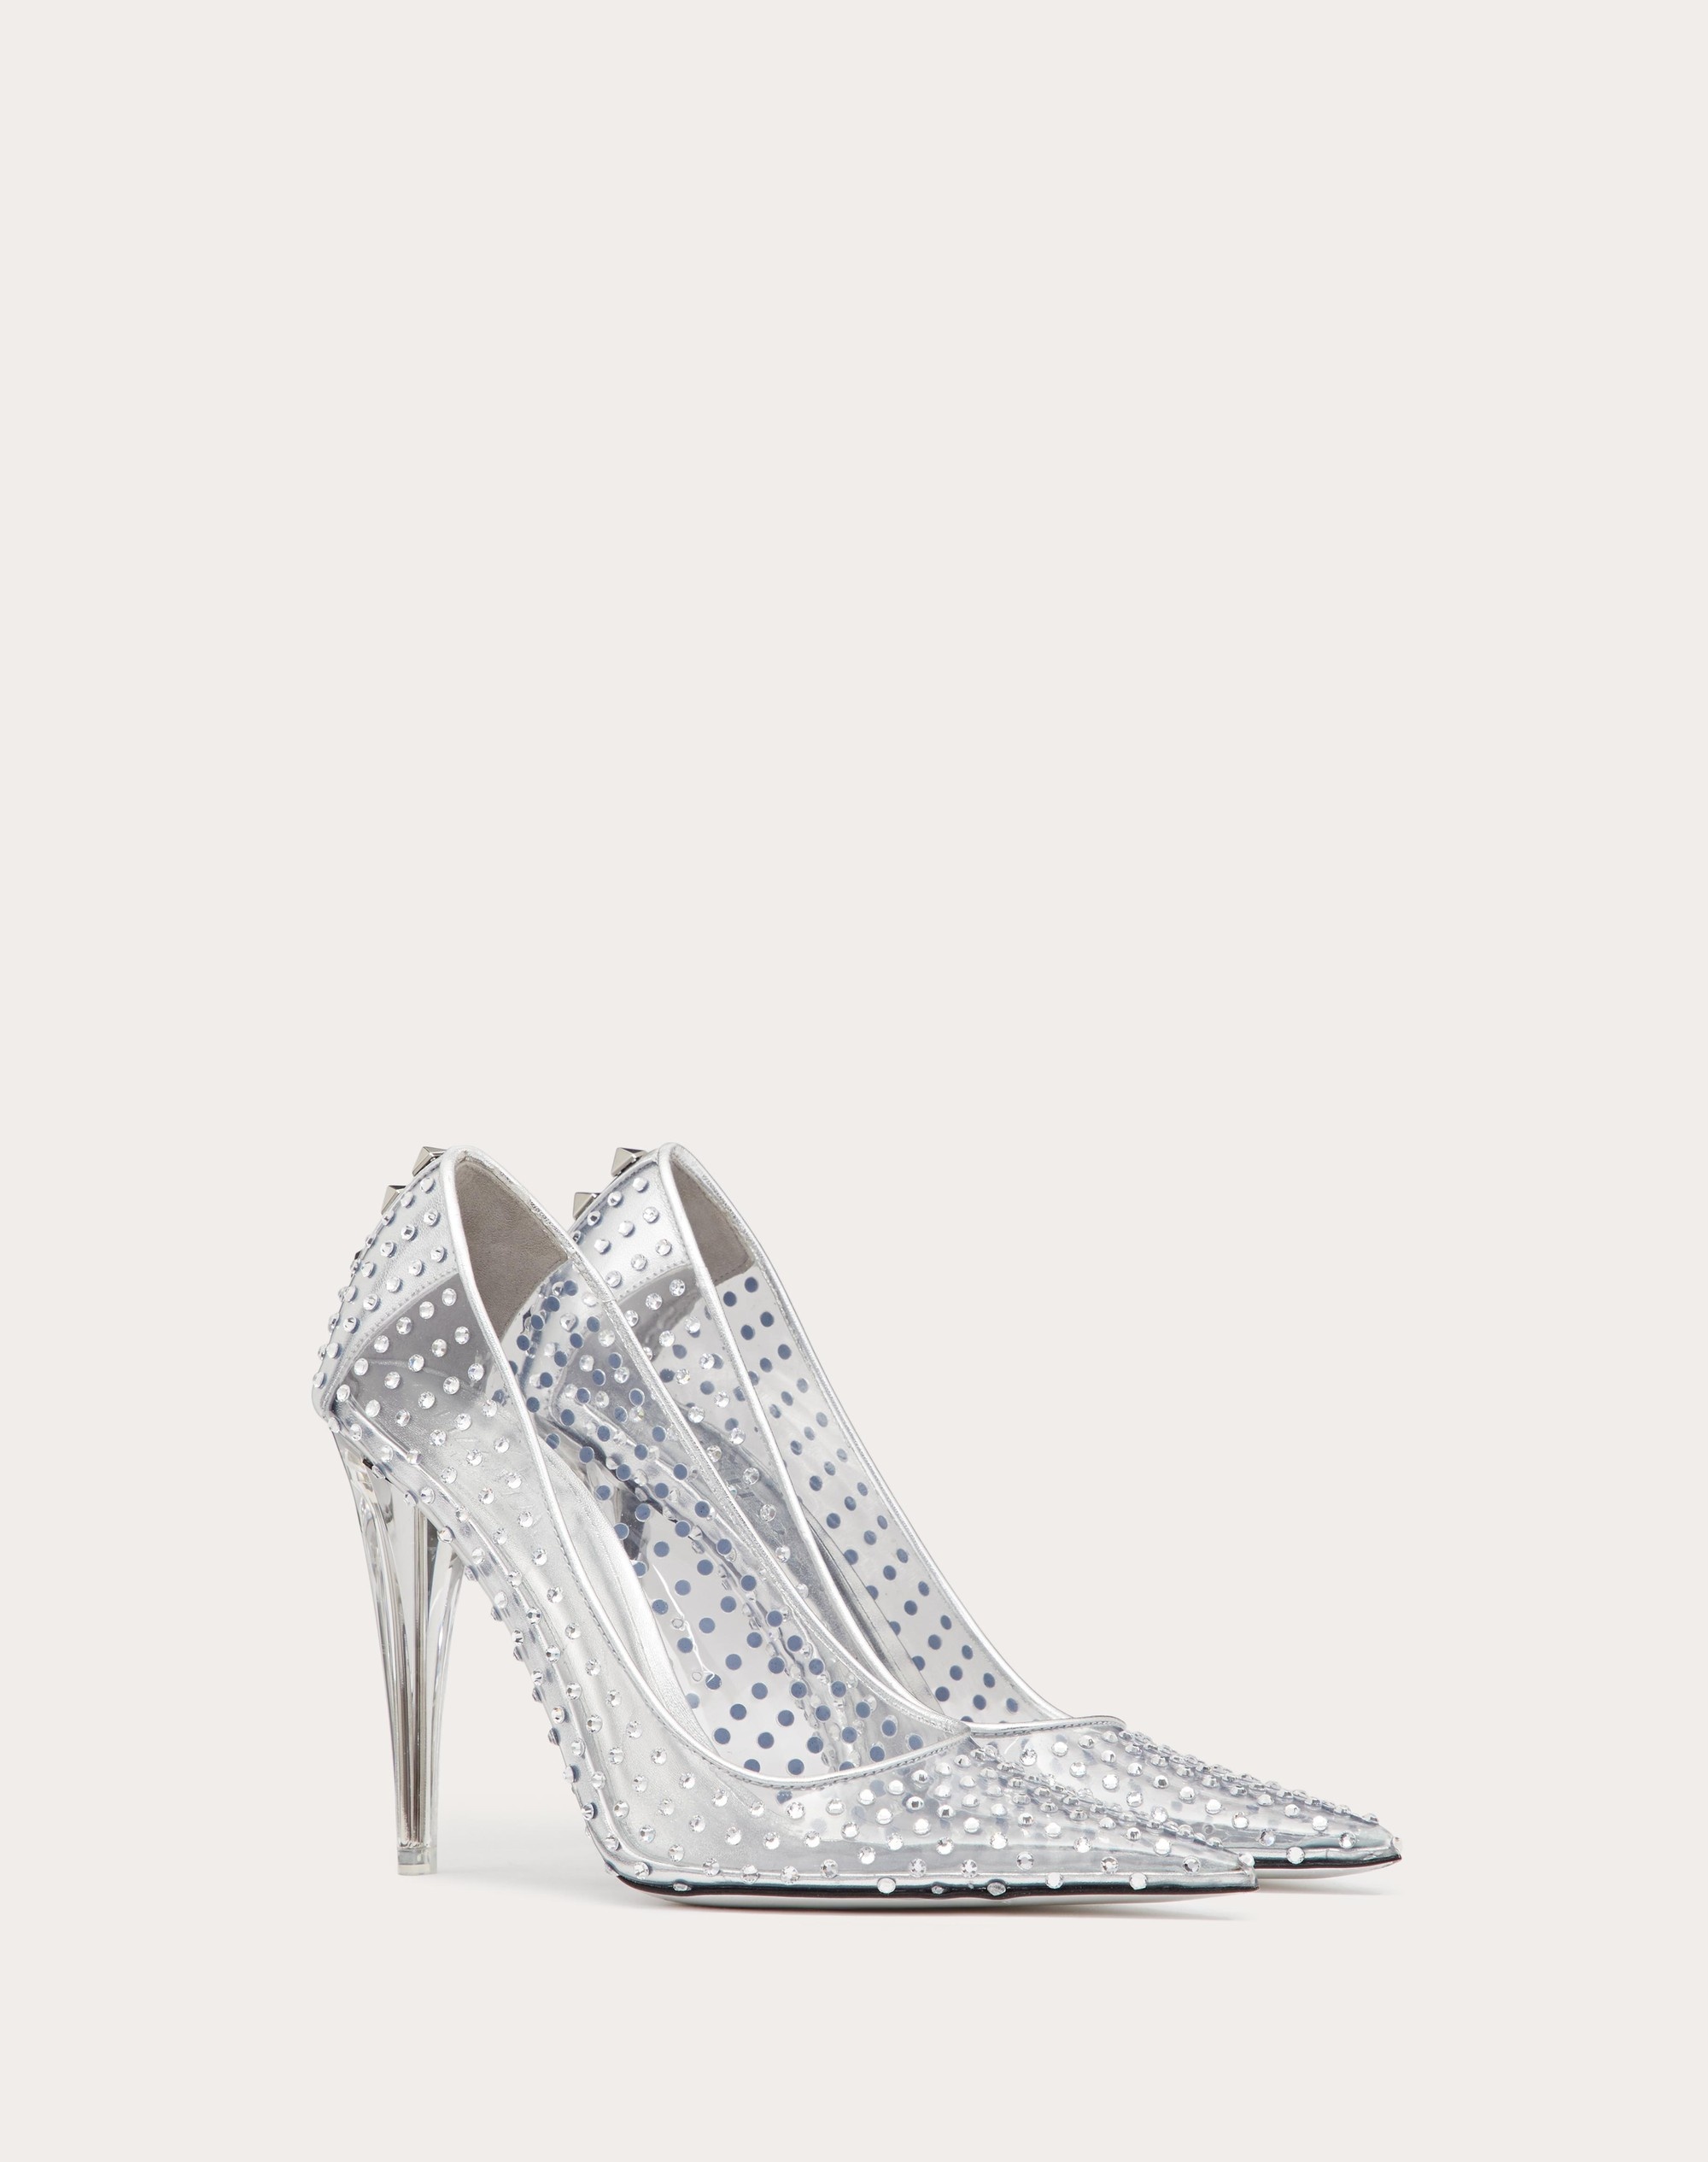 ROCKSTUD PUMP IN POLYMER MATERIAL WITH CRYSTAL APPLIQUÉS AND 110 MM PLEXI HEEL - 2